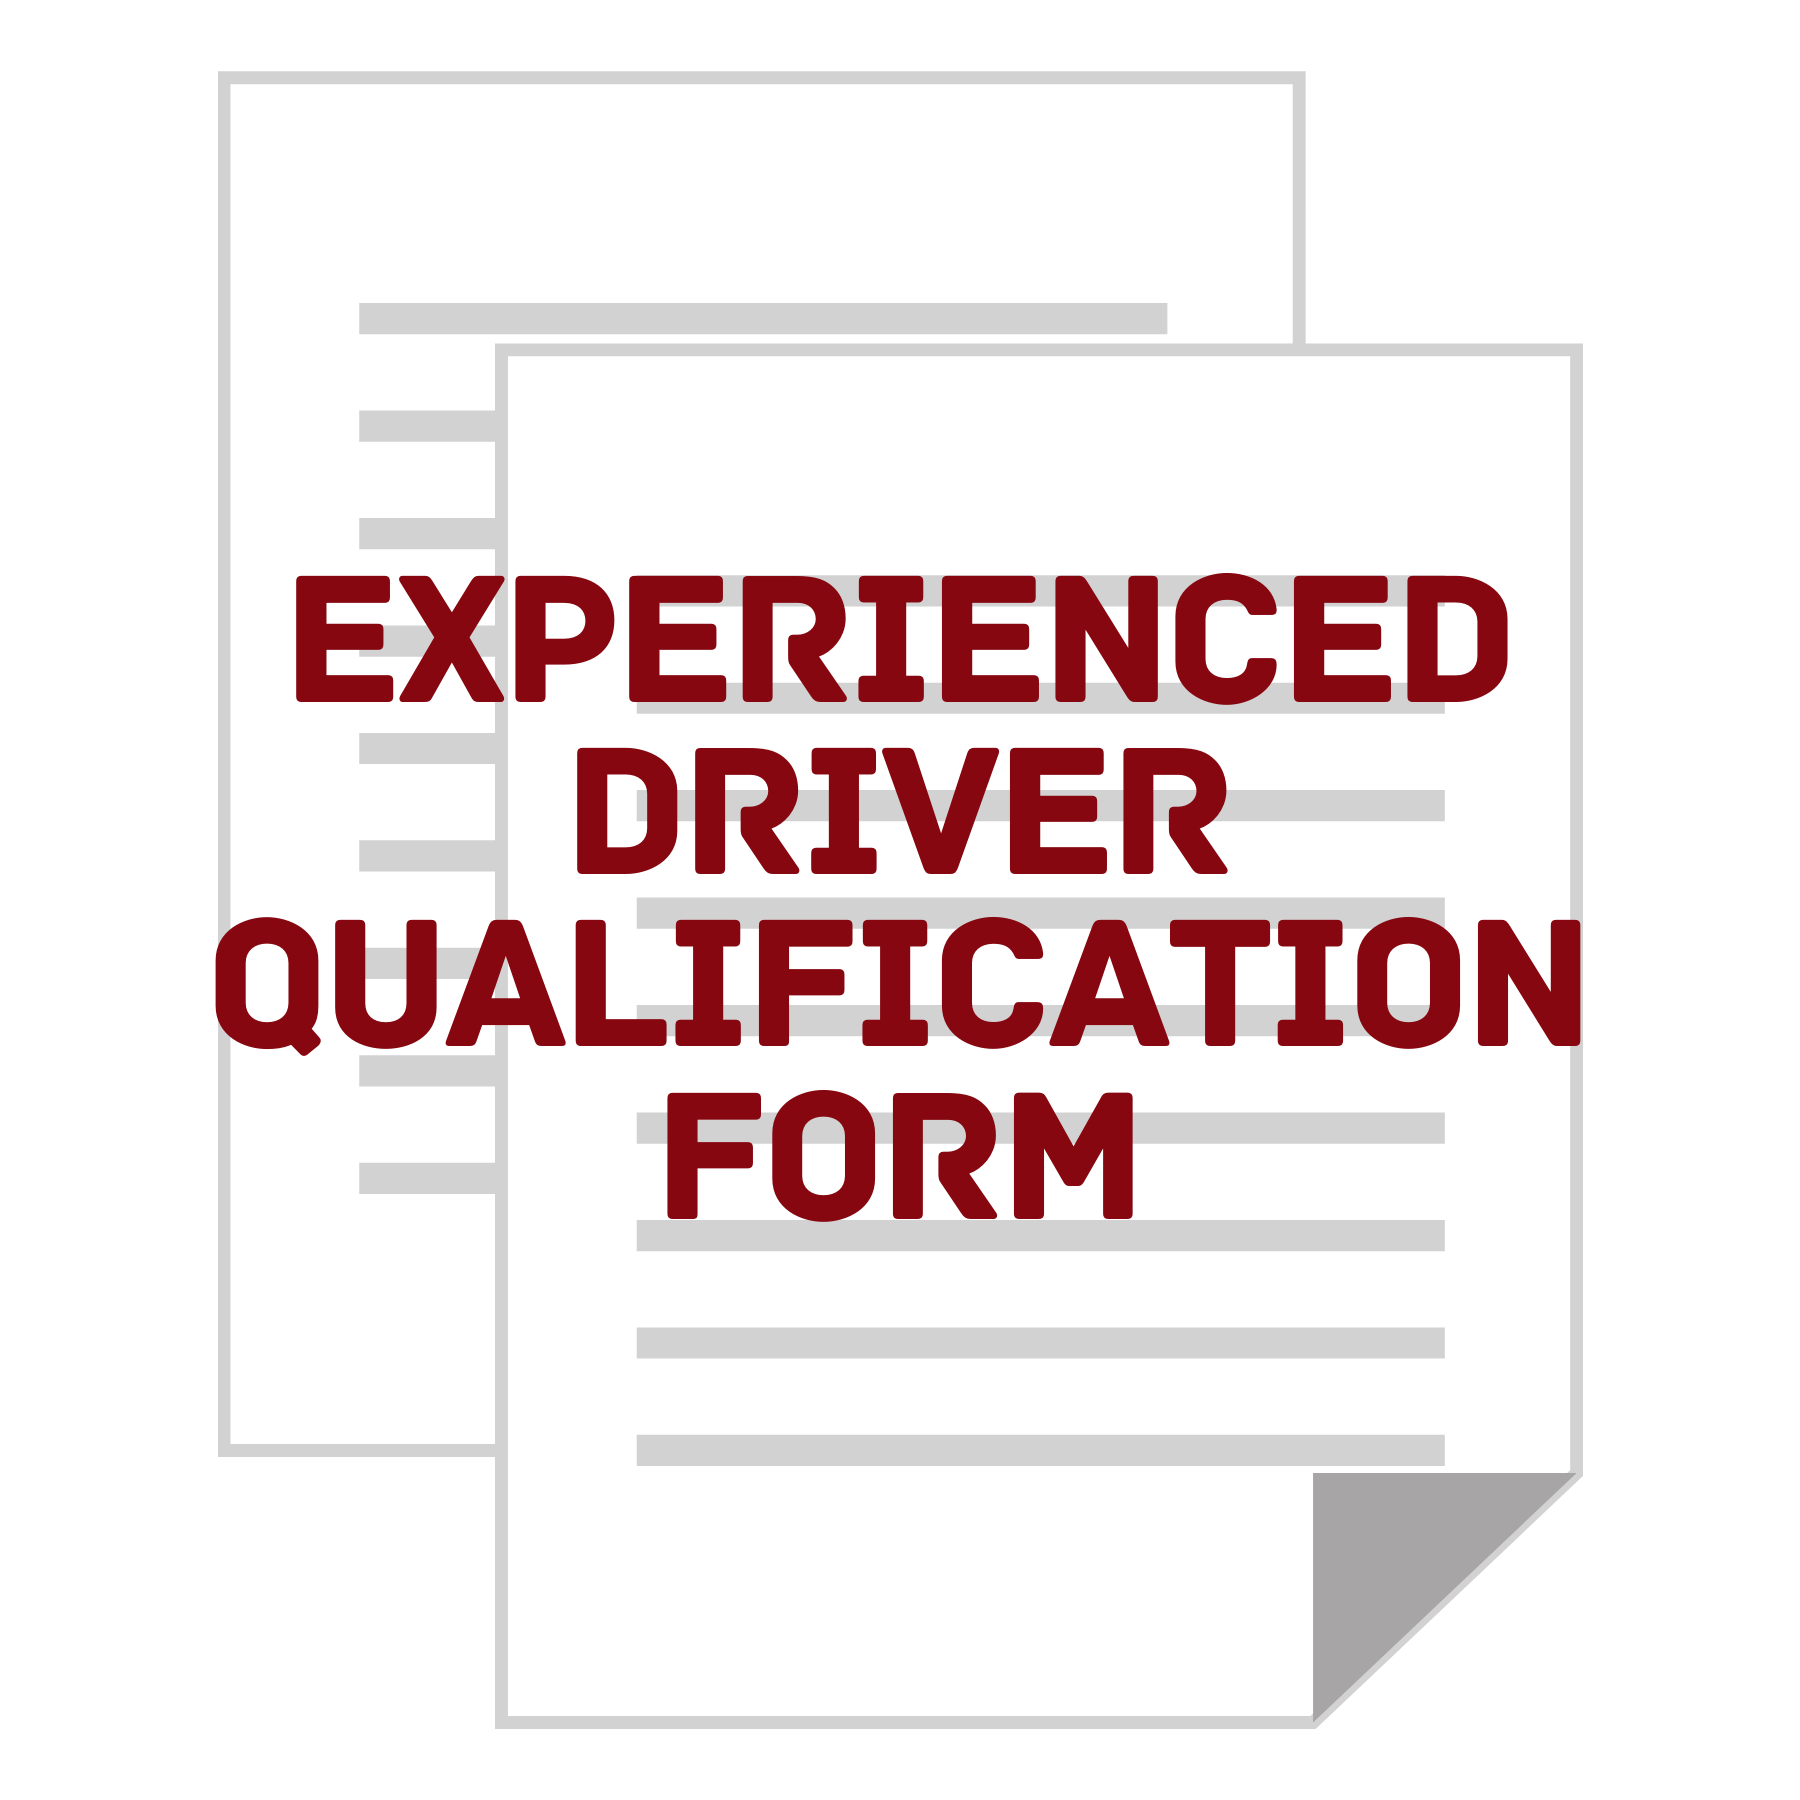 Experienced Driver Qualification Form